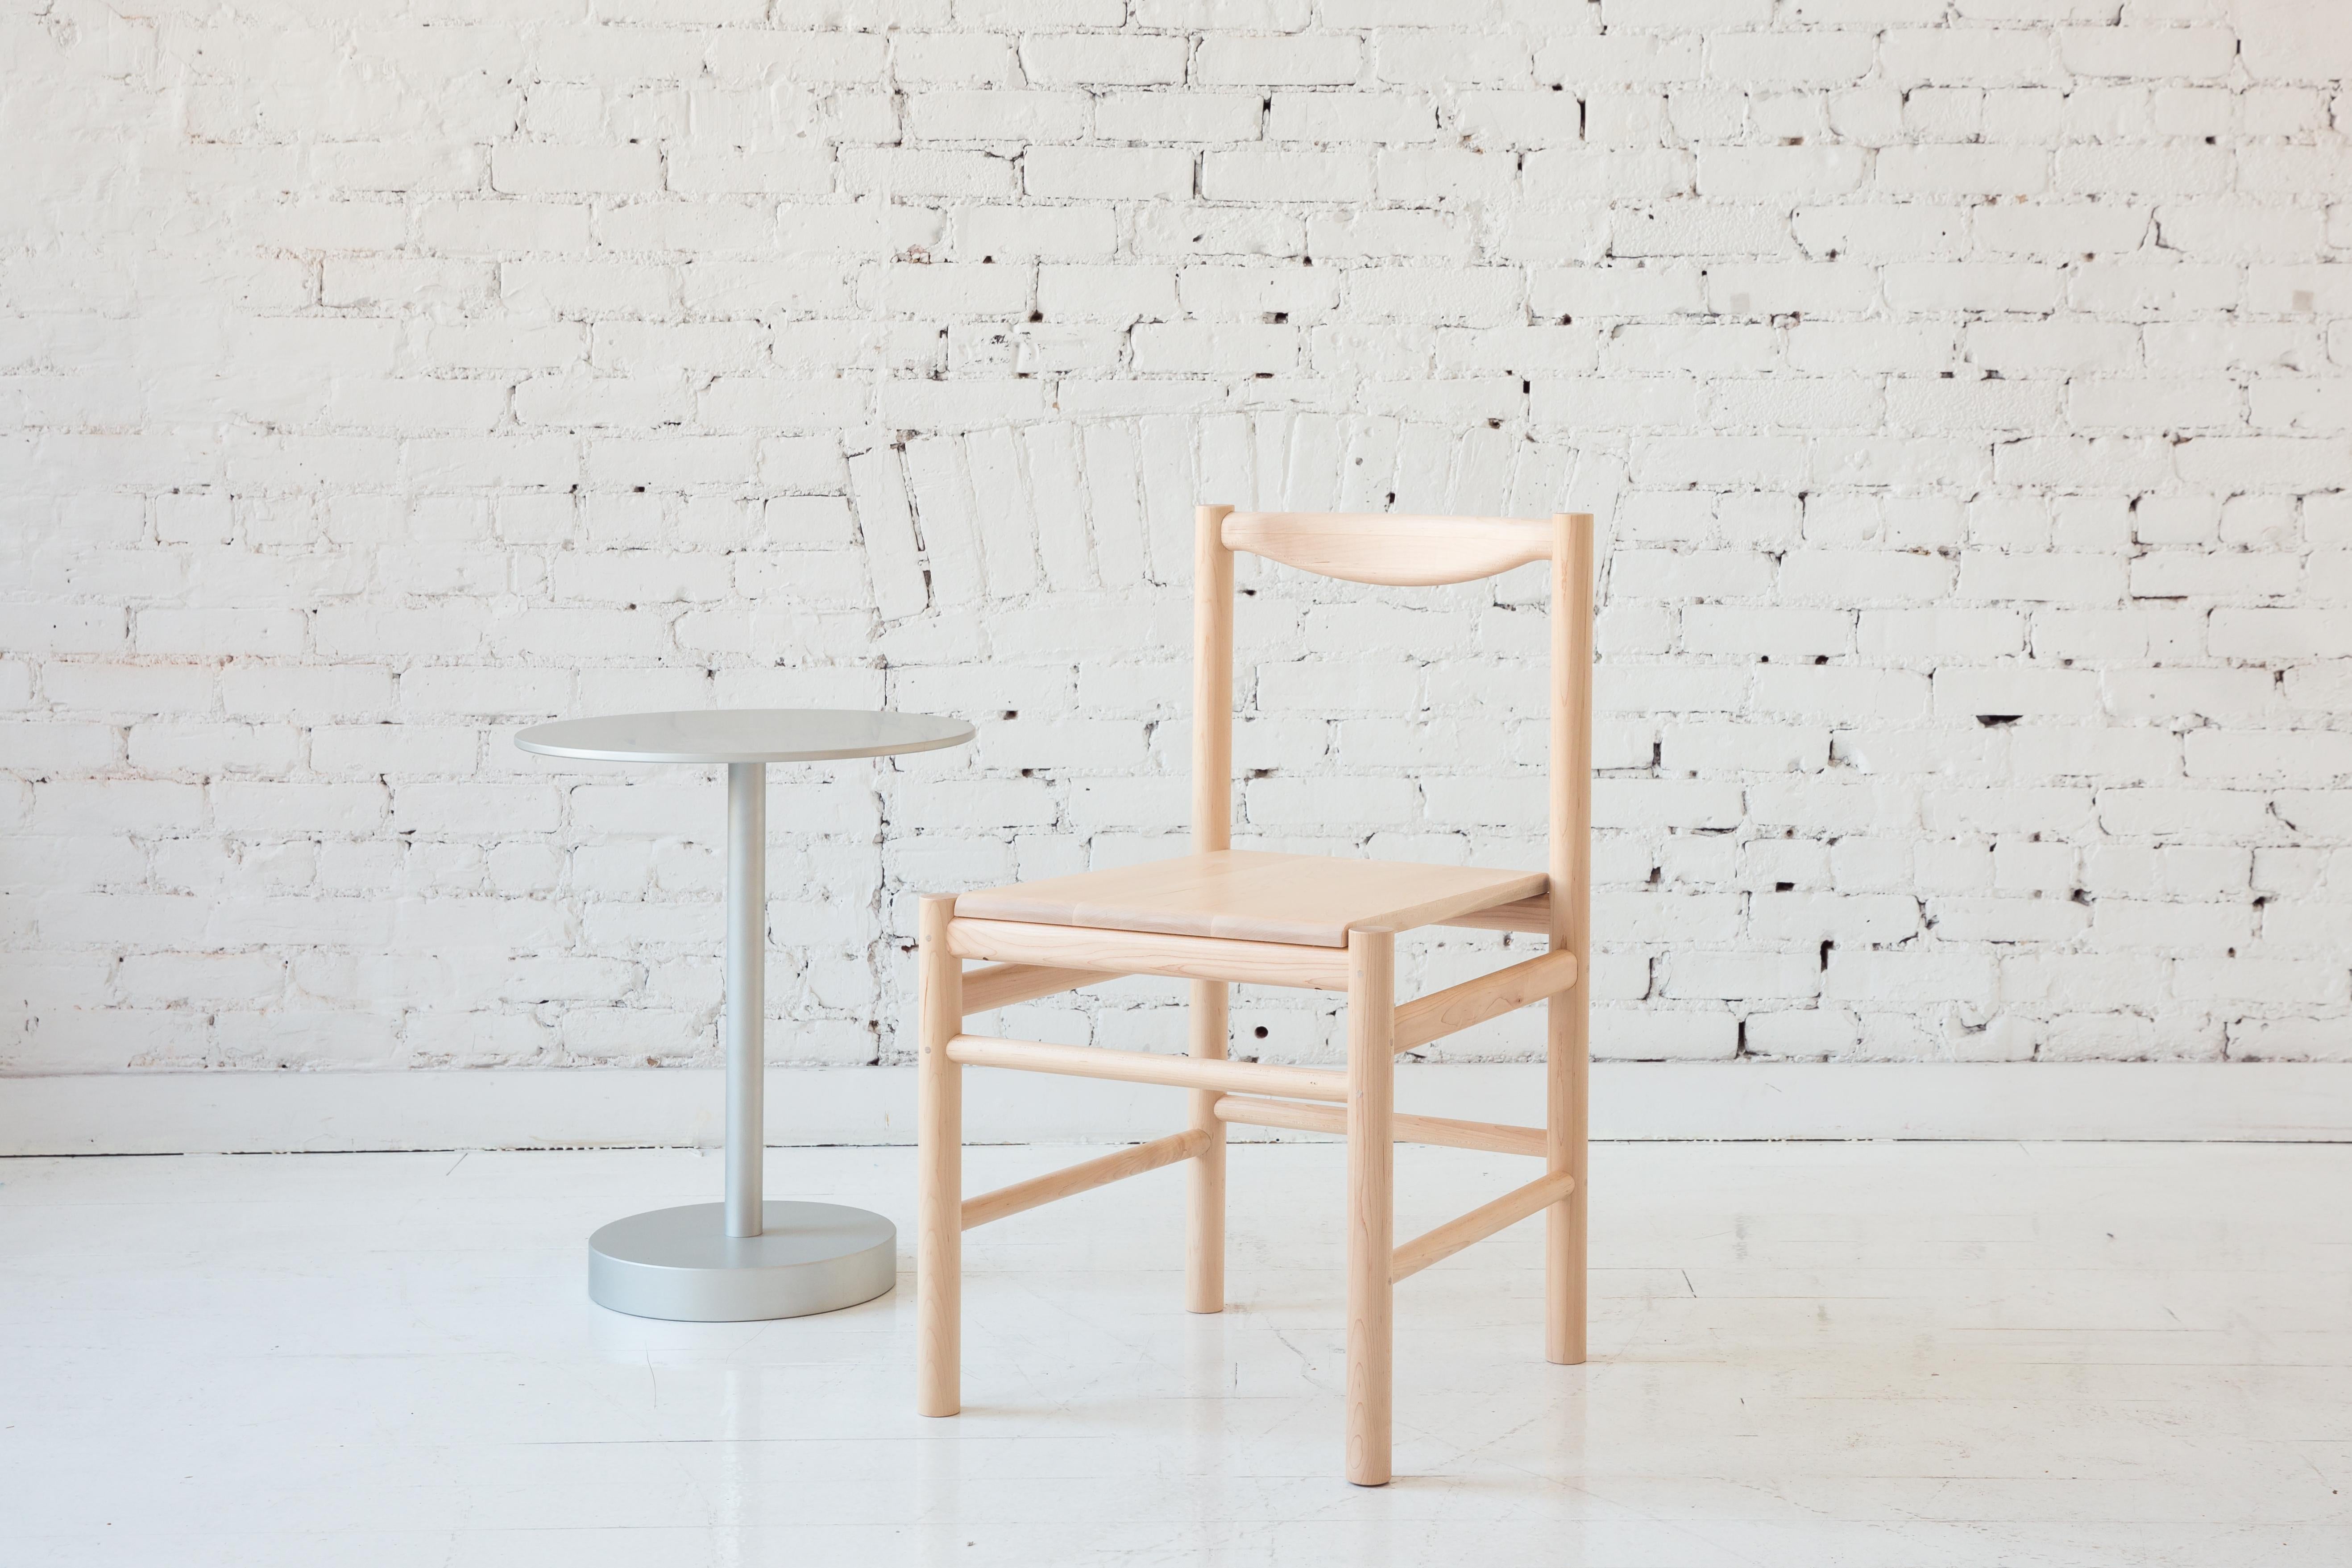 Shaker inspired wood side chair with comfortable contoured back rest. Option for a plain wooden seat pan or a seat pan with a low profile leather or shearling pad. This chair's simplicity makes it versatile to work in many different environments.